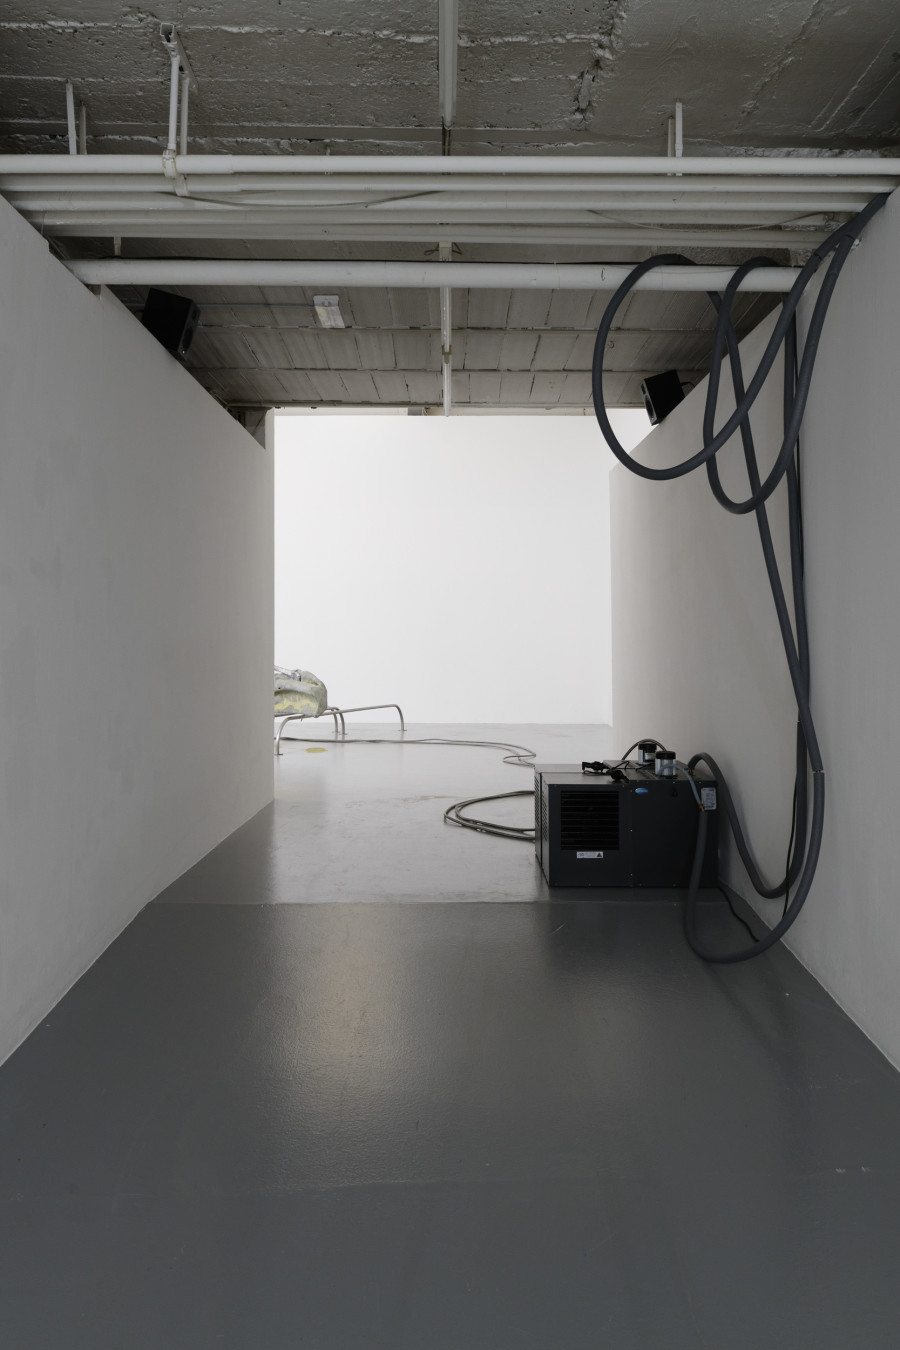 Exhibition view, Isabelle Andriessen, BUNK, CAN Centre d’art Neuchâtel, 2021. Photography: Aurélien Mole / all images copyright and courtesy of the artist and CAN Centre d’art Neuchâtel.